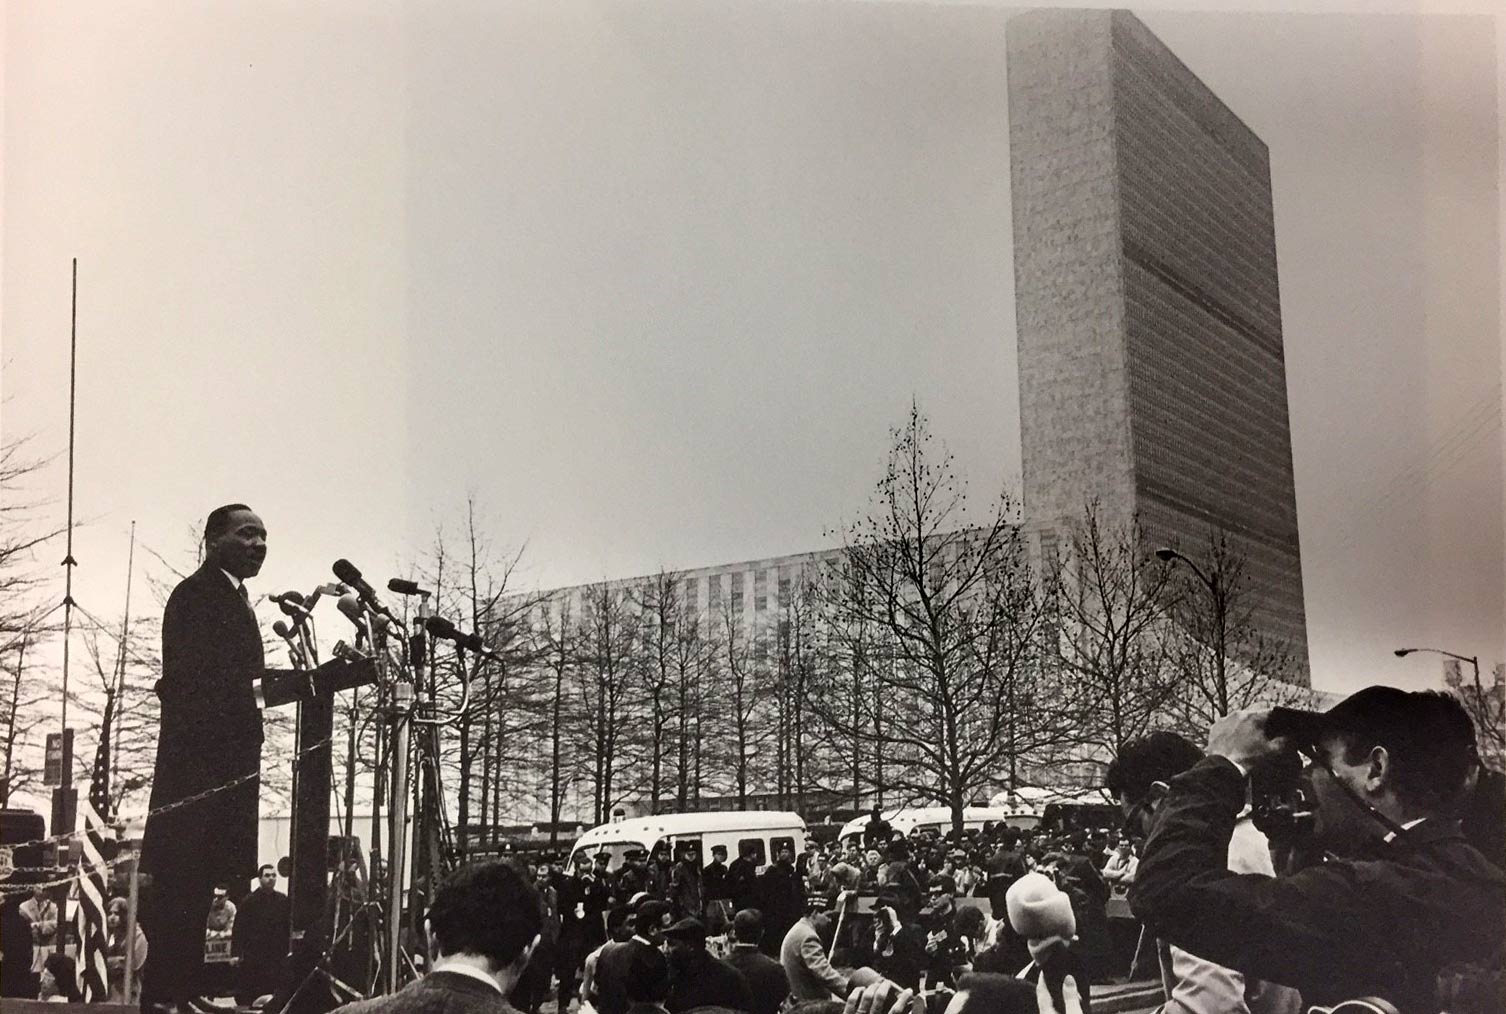 From an elevated platform, Rev. Martin Luther King Jr. addresses a gathered crowd of journalists in New York City